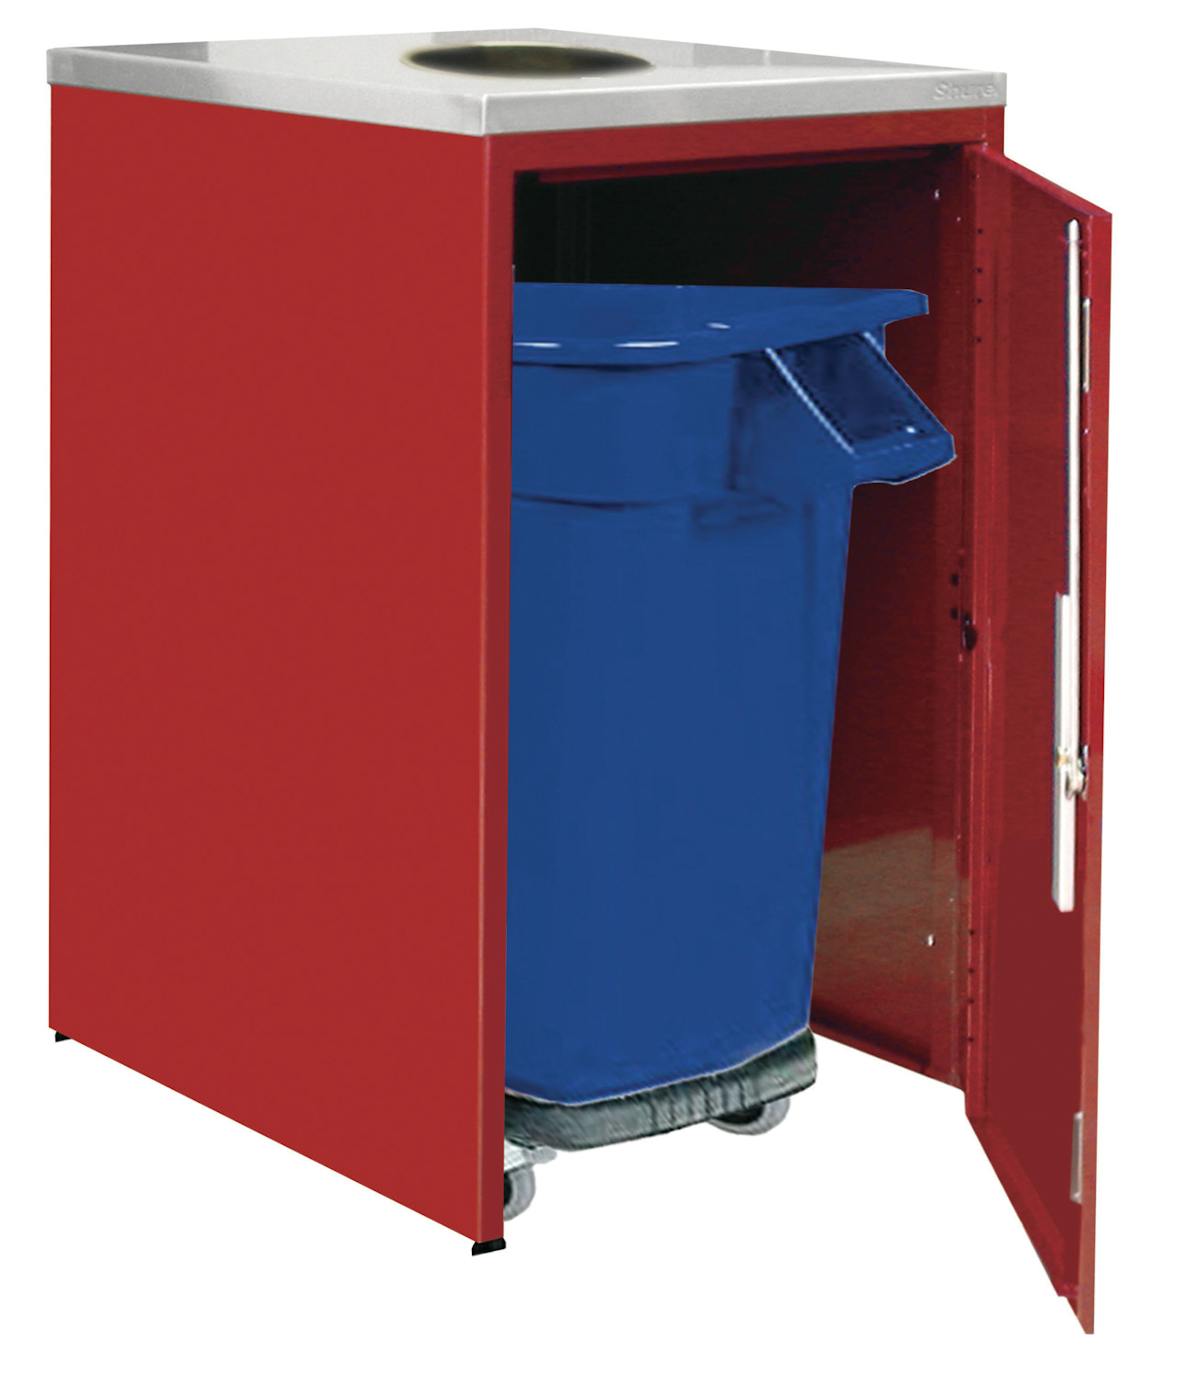 Recyclecabinet 10106773